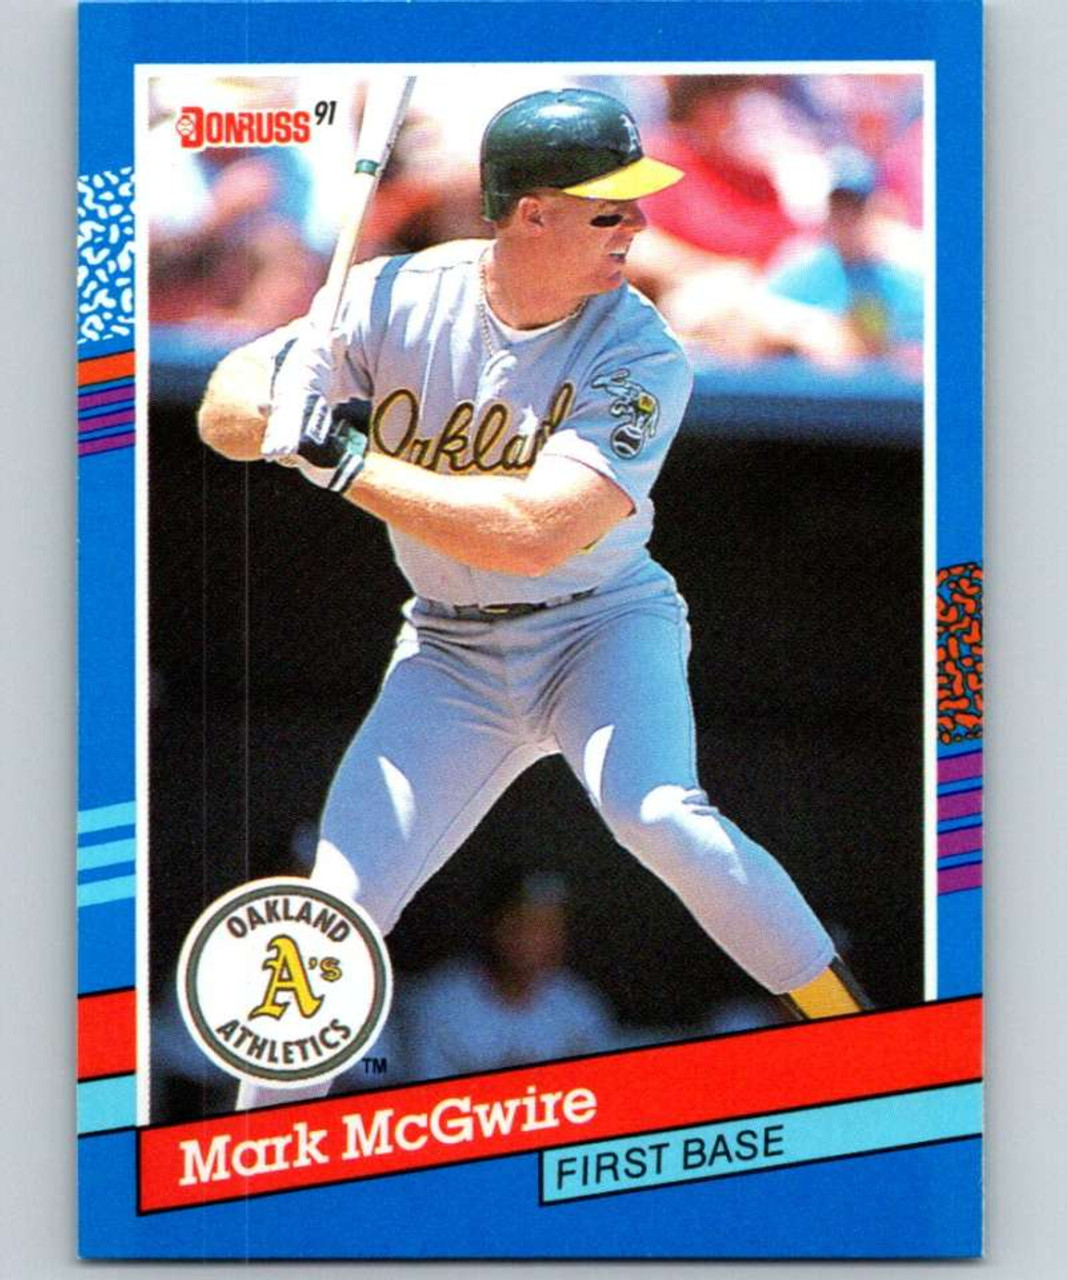 Mark McGwire 1987 ROOKIE CARD LOT TOPPS DONRUSS FLEER GLOSSY ALL